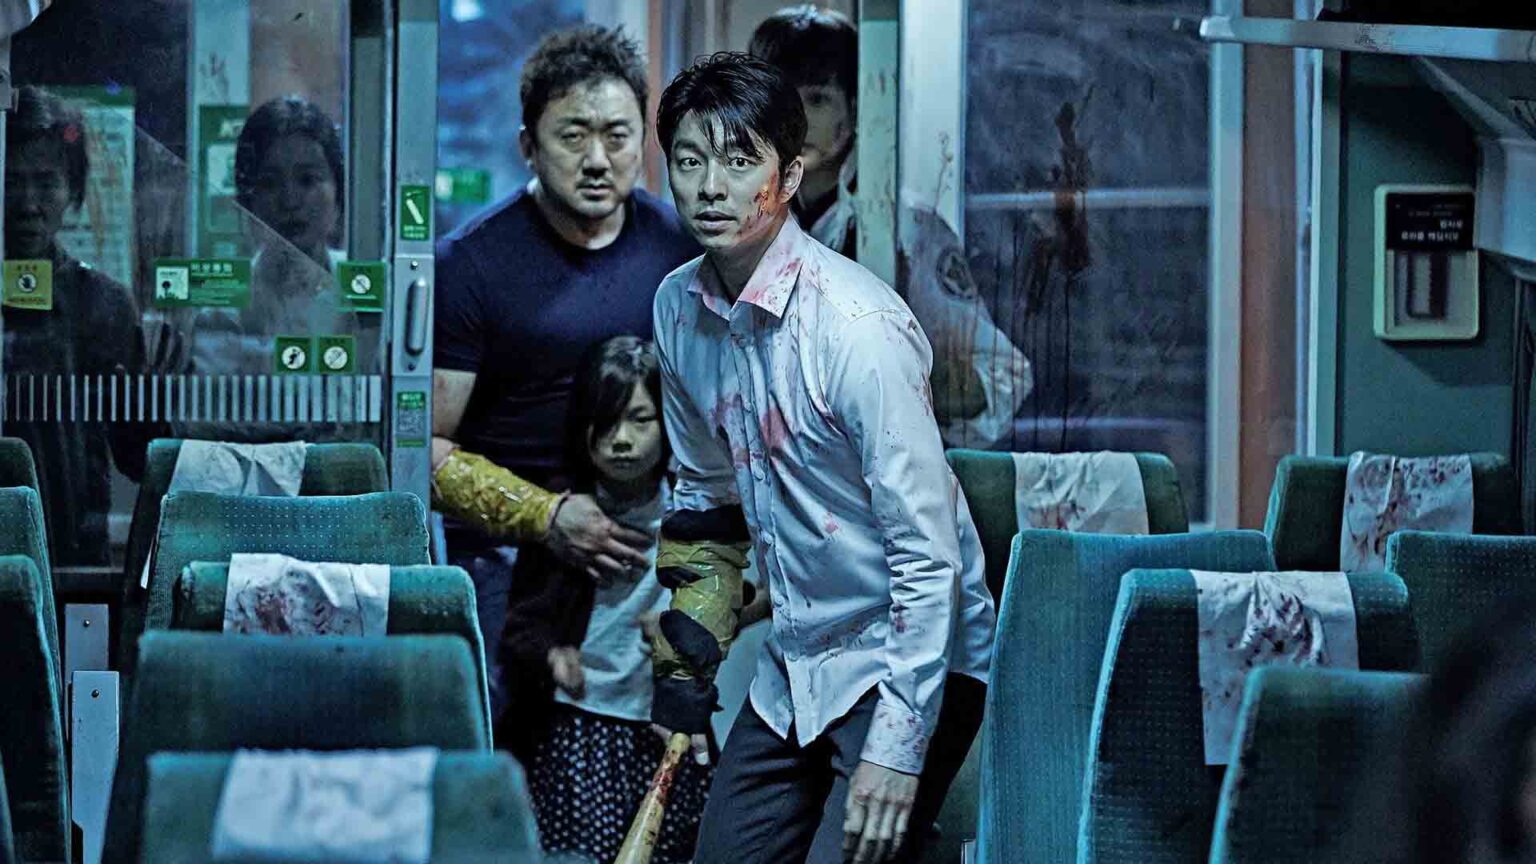 For fans of horror movies, it’s known that some countries are just better at horror than others. Here are the scariest Korean horror movies.